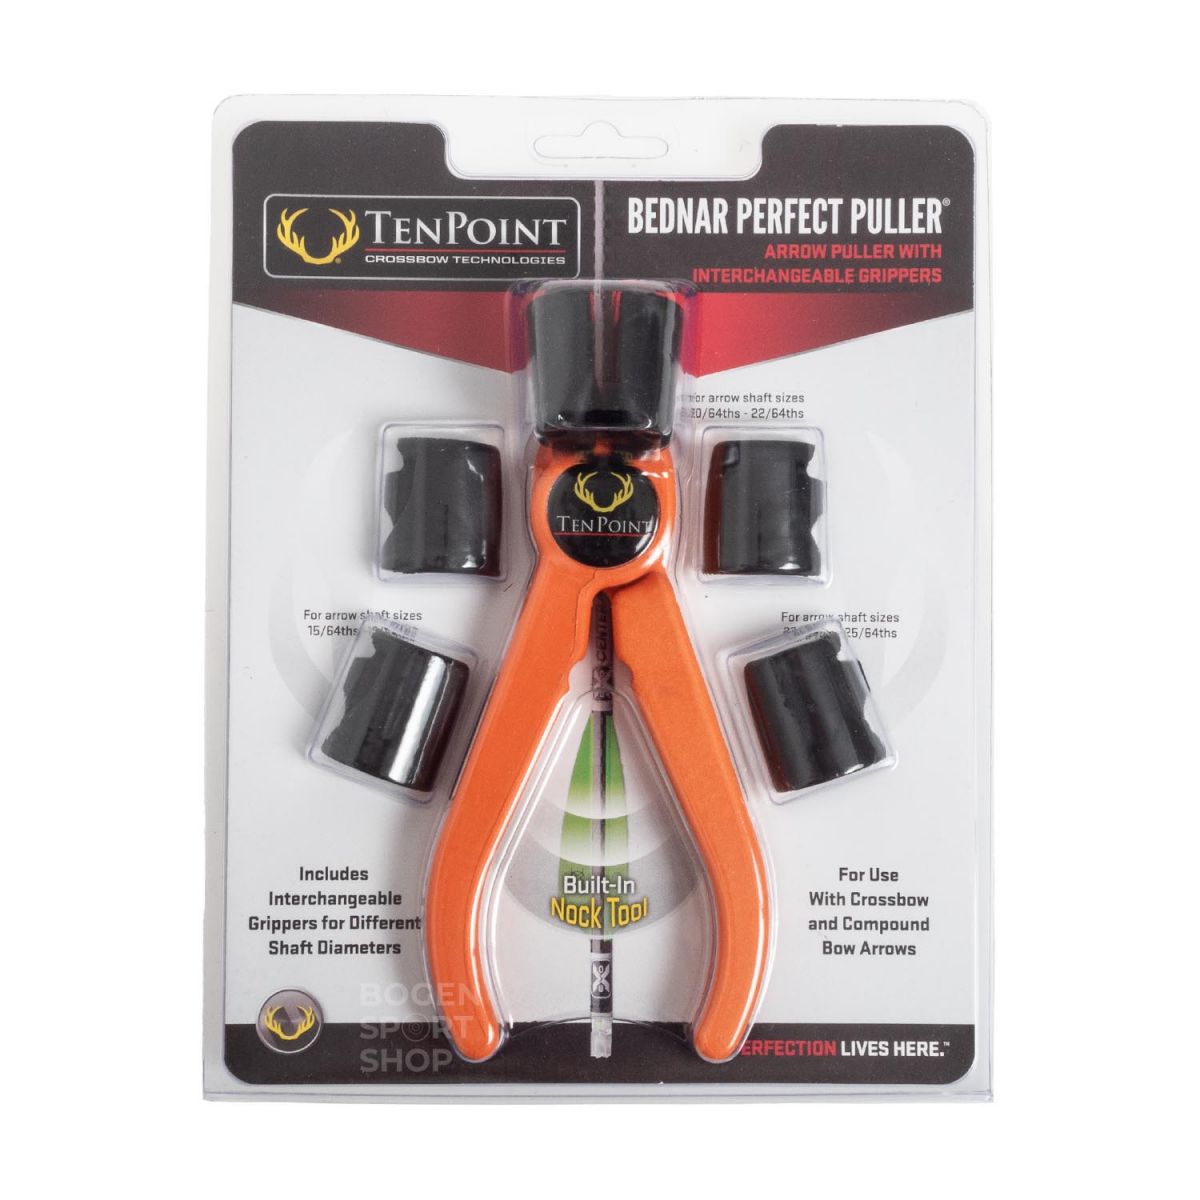 TenPoint Bednar Perfect Puller  Pull Arrows from Targets with Ease